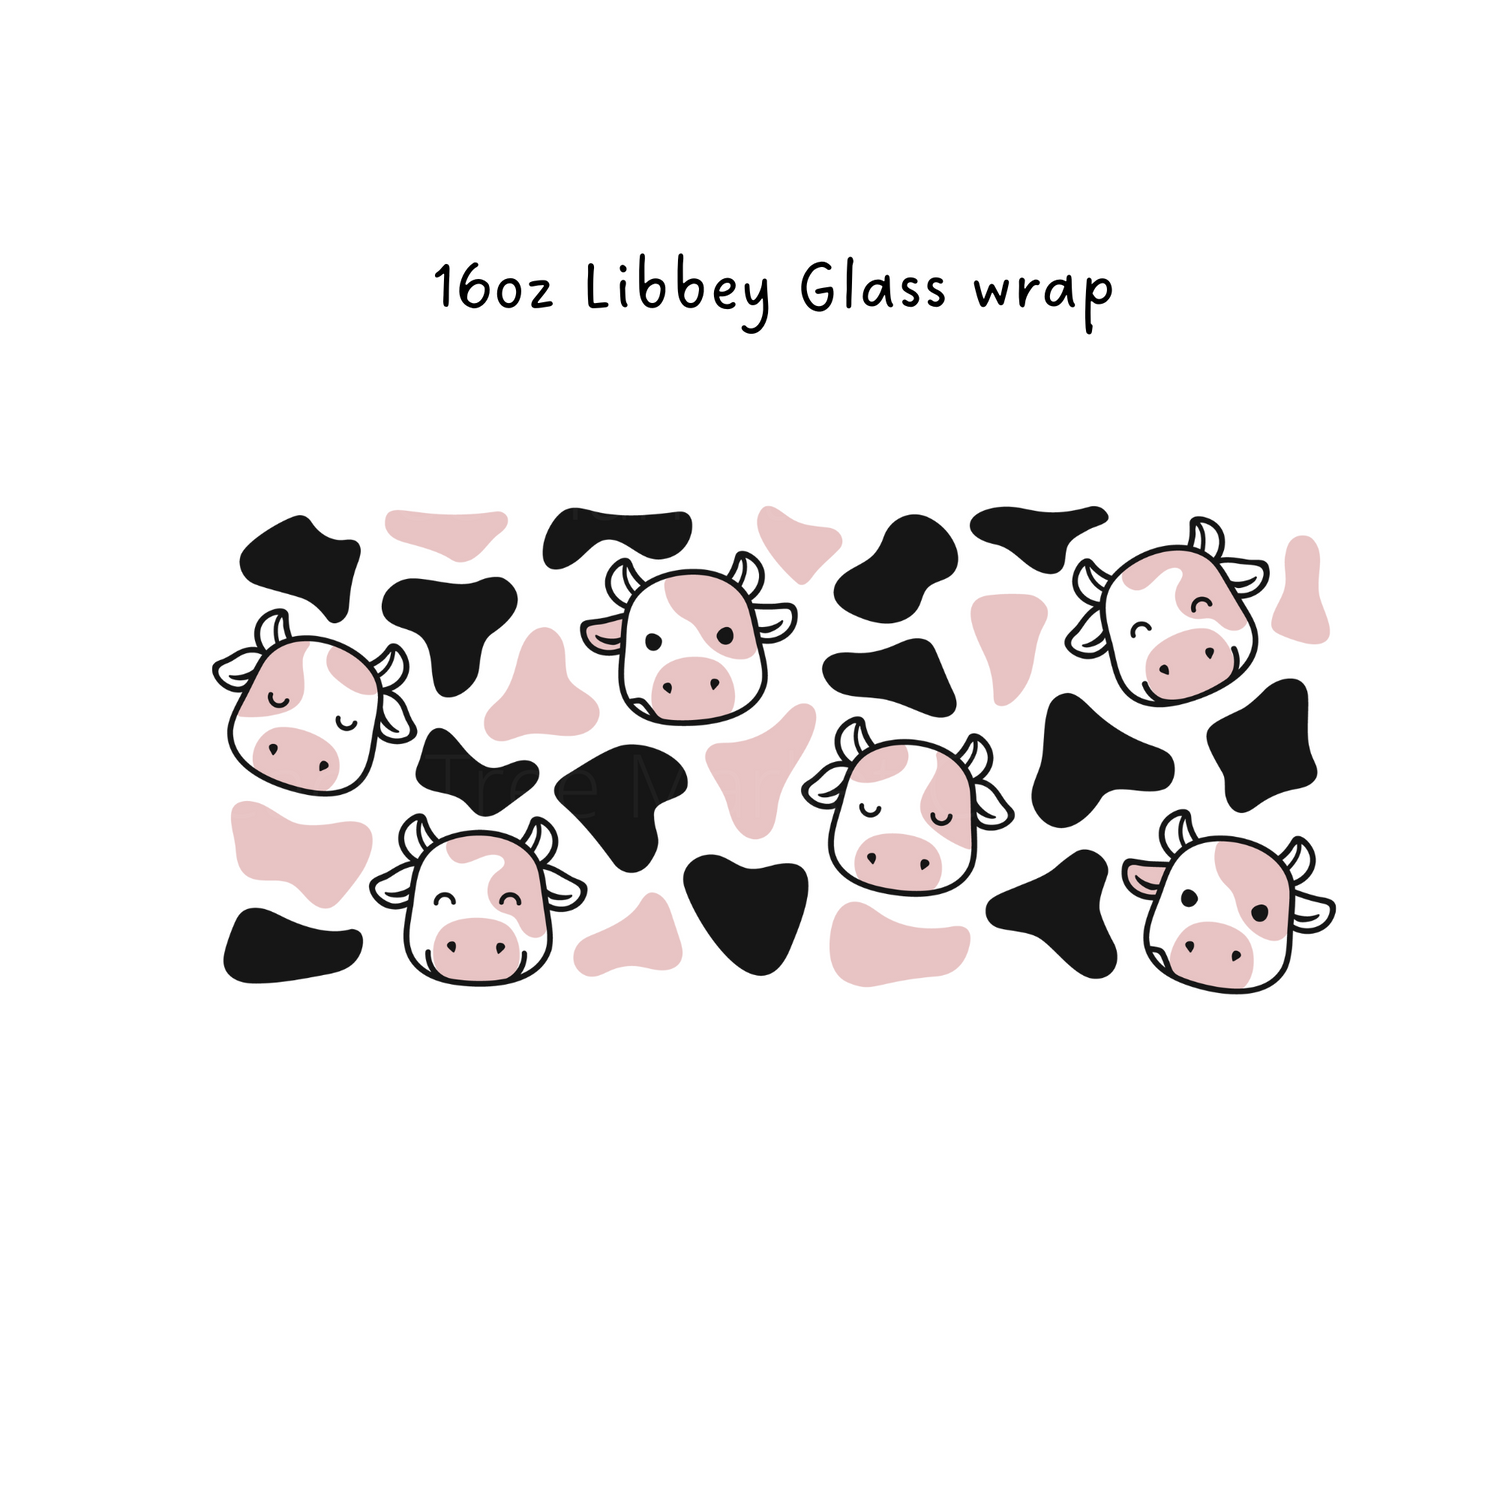 Strawberry Pink Cute Cow Print Wrap - 16 oz Libby Beer Glass Wrap